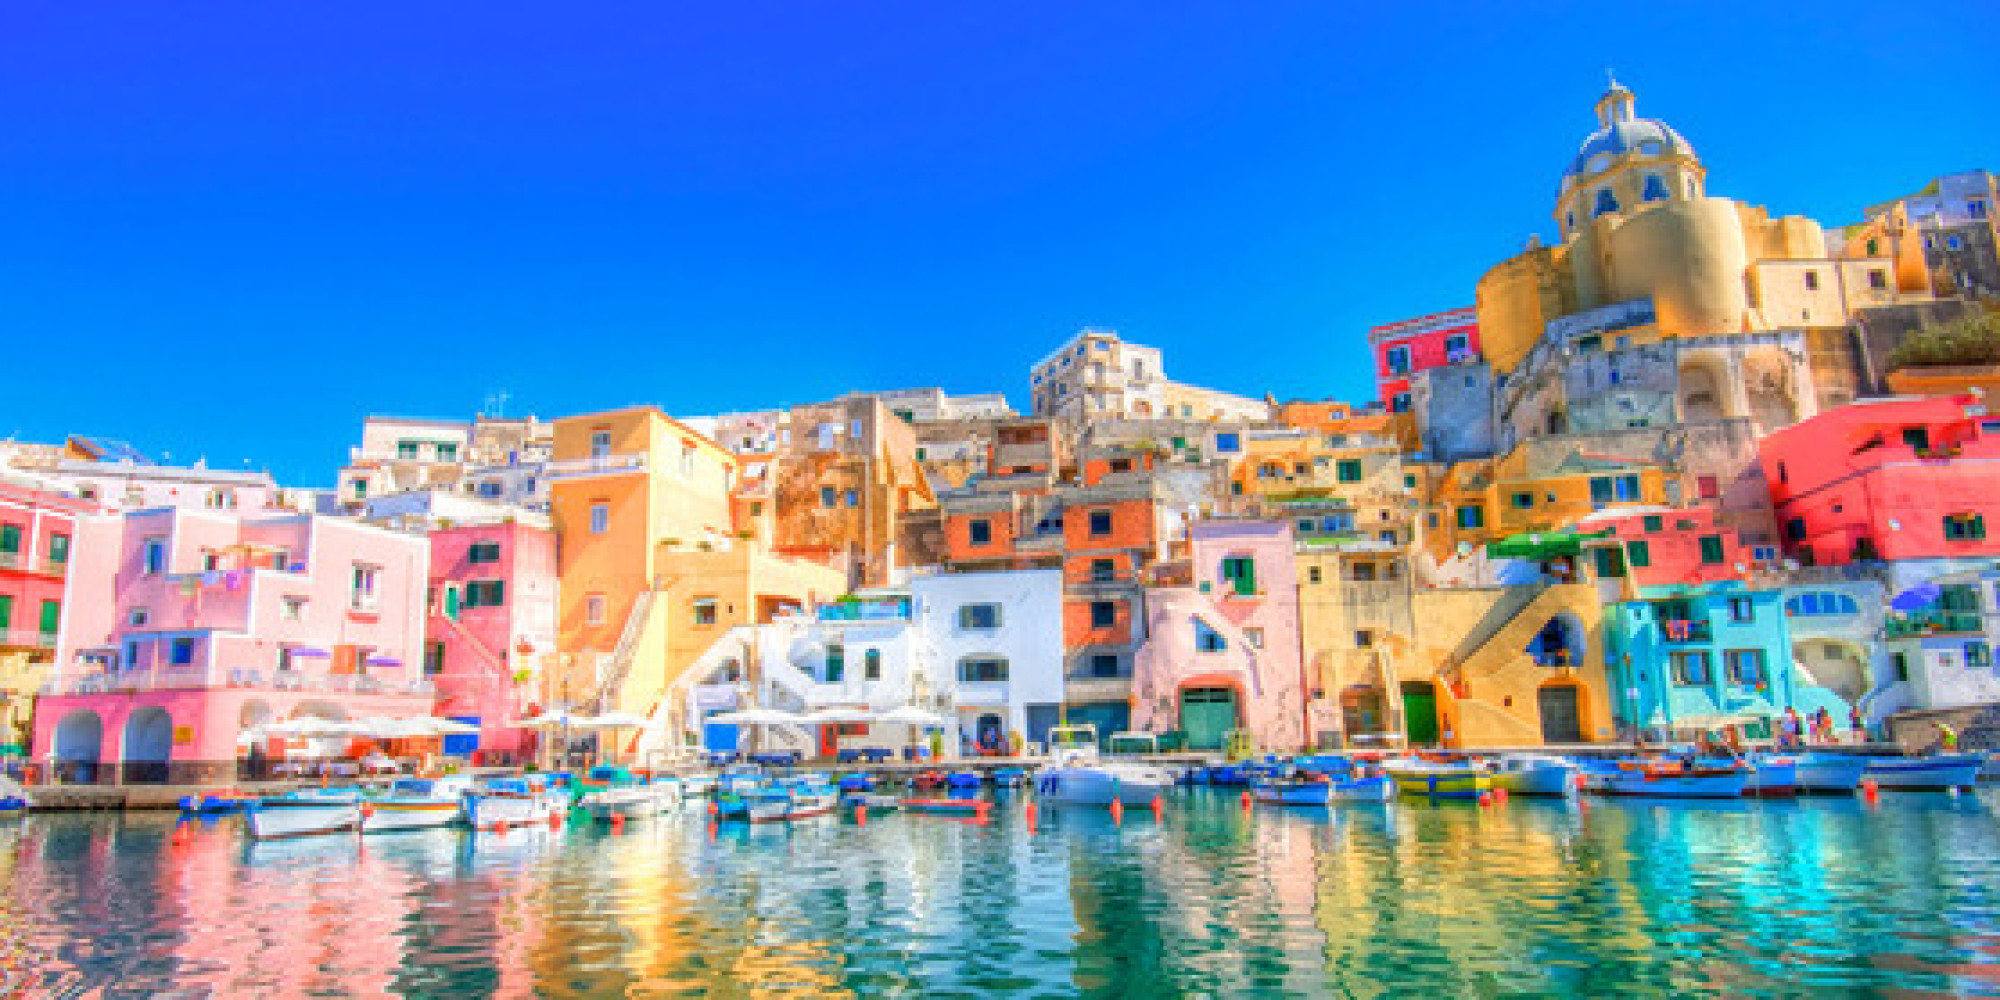 10 Of The Most Colorful Places On Earth | HuffPost